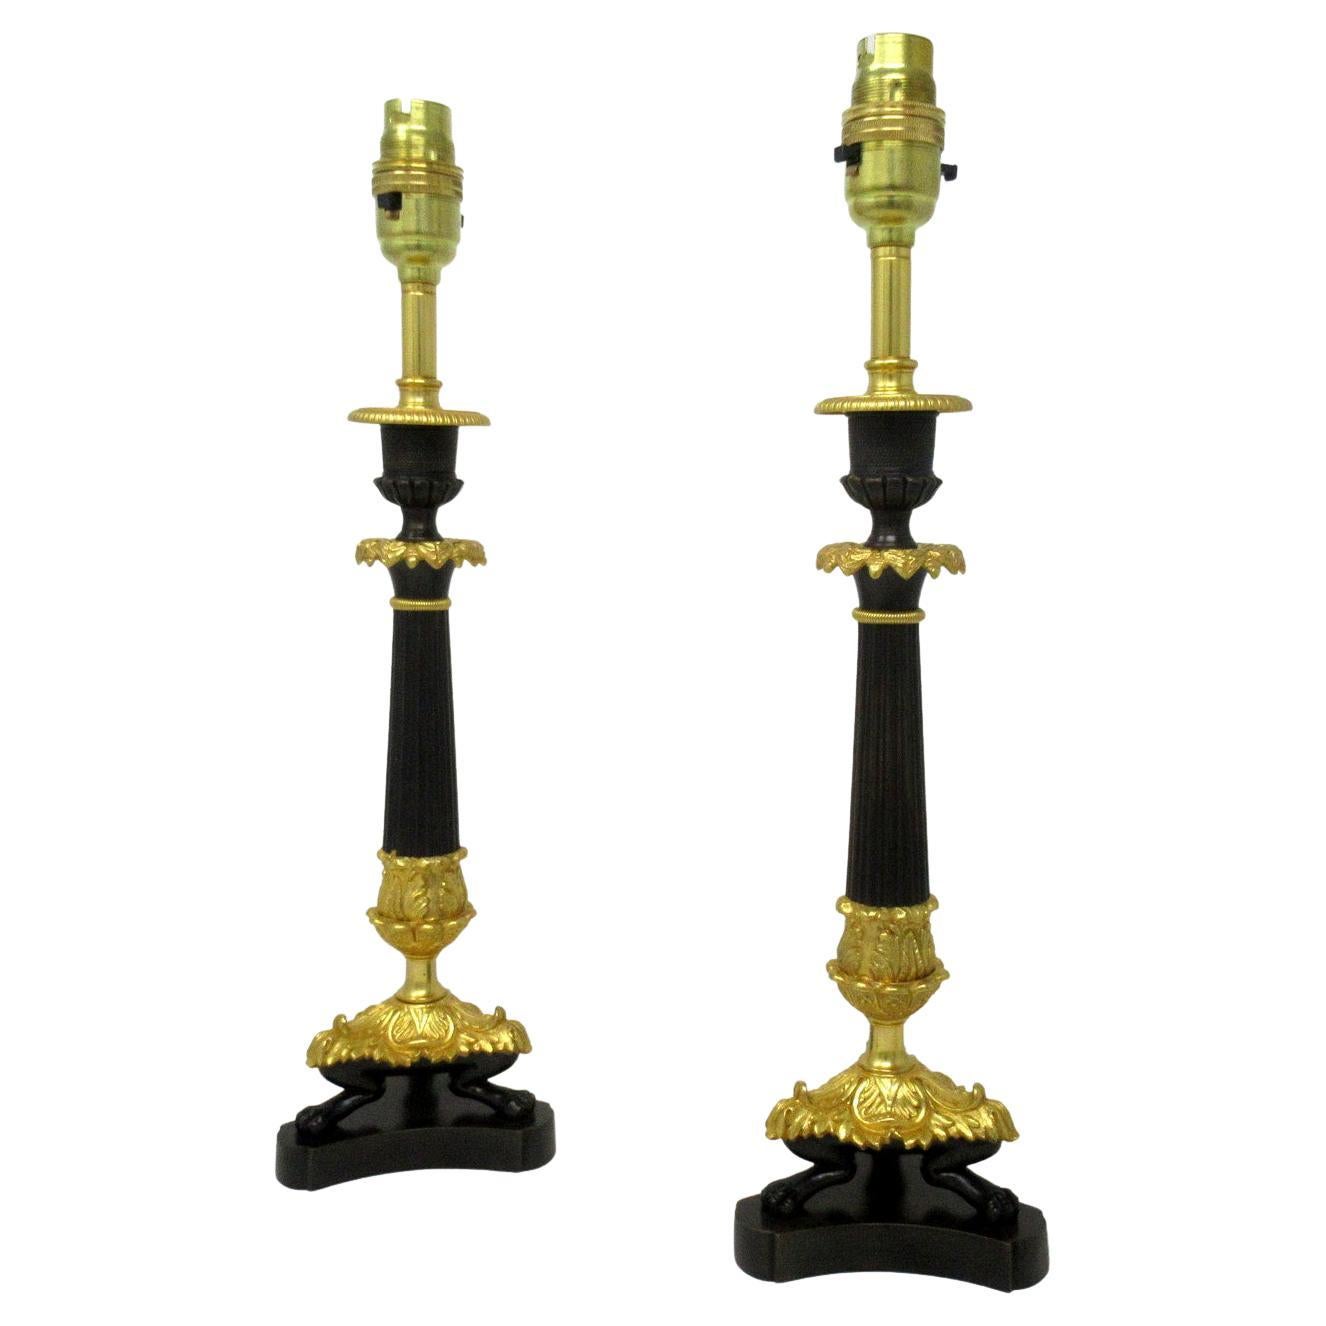 Antique Pair of French Doré Bronze Neoclassical Ormolu Gilt Candlestick Lamps